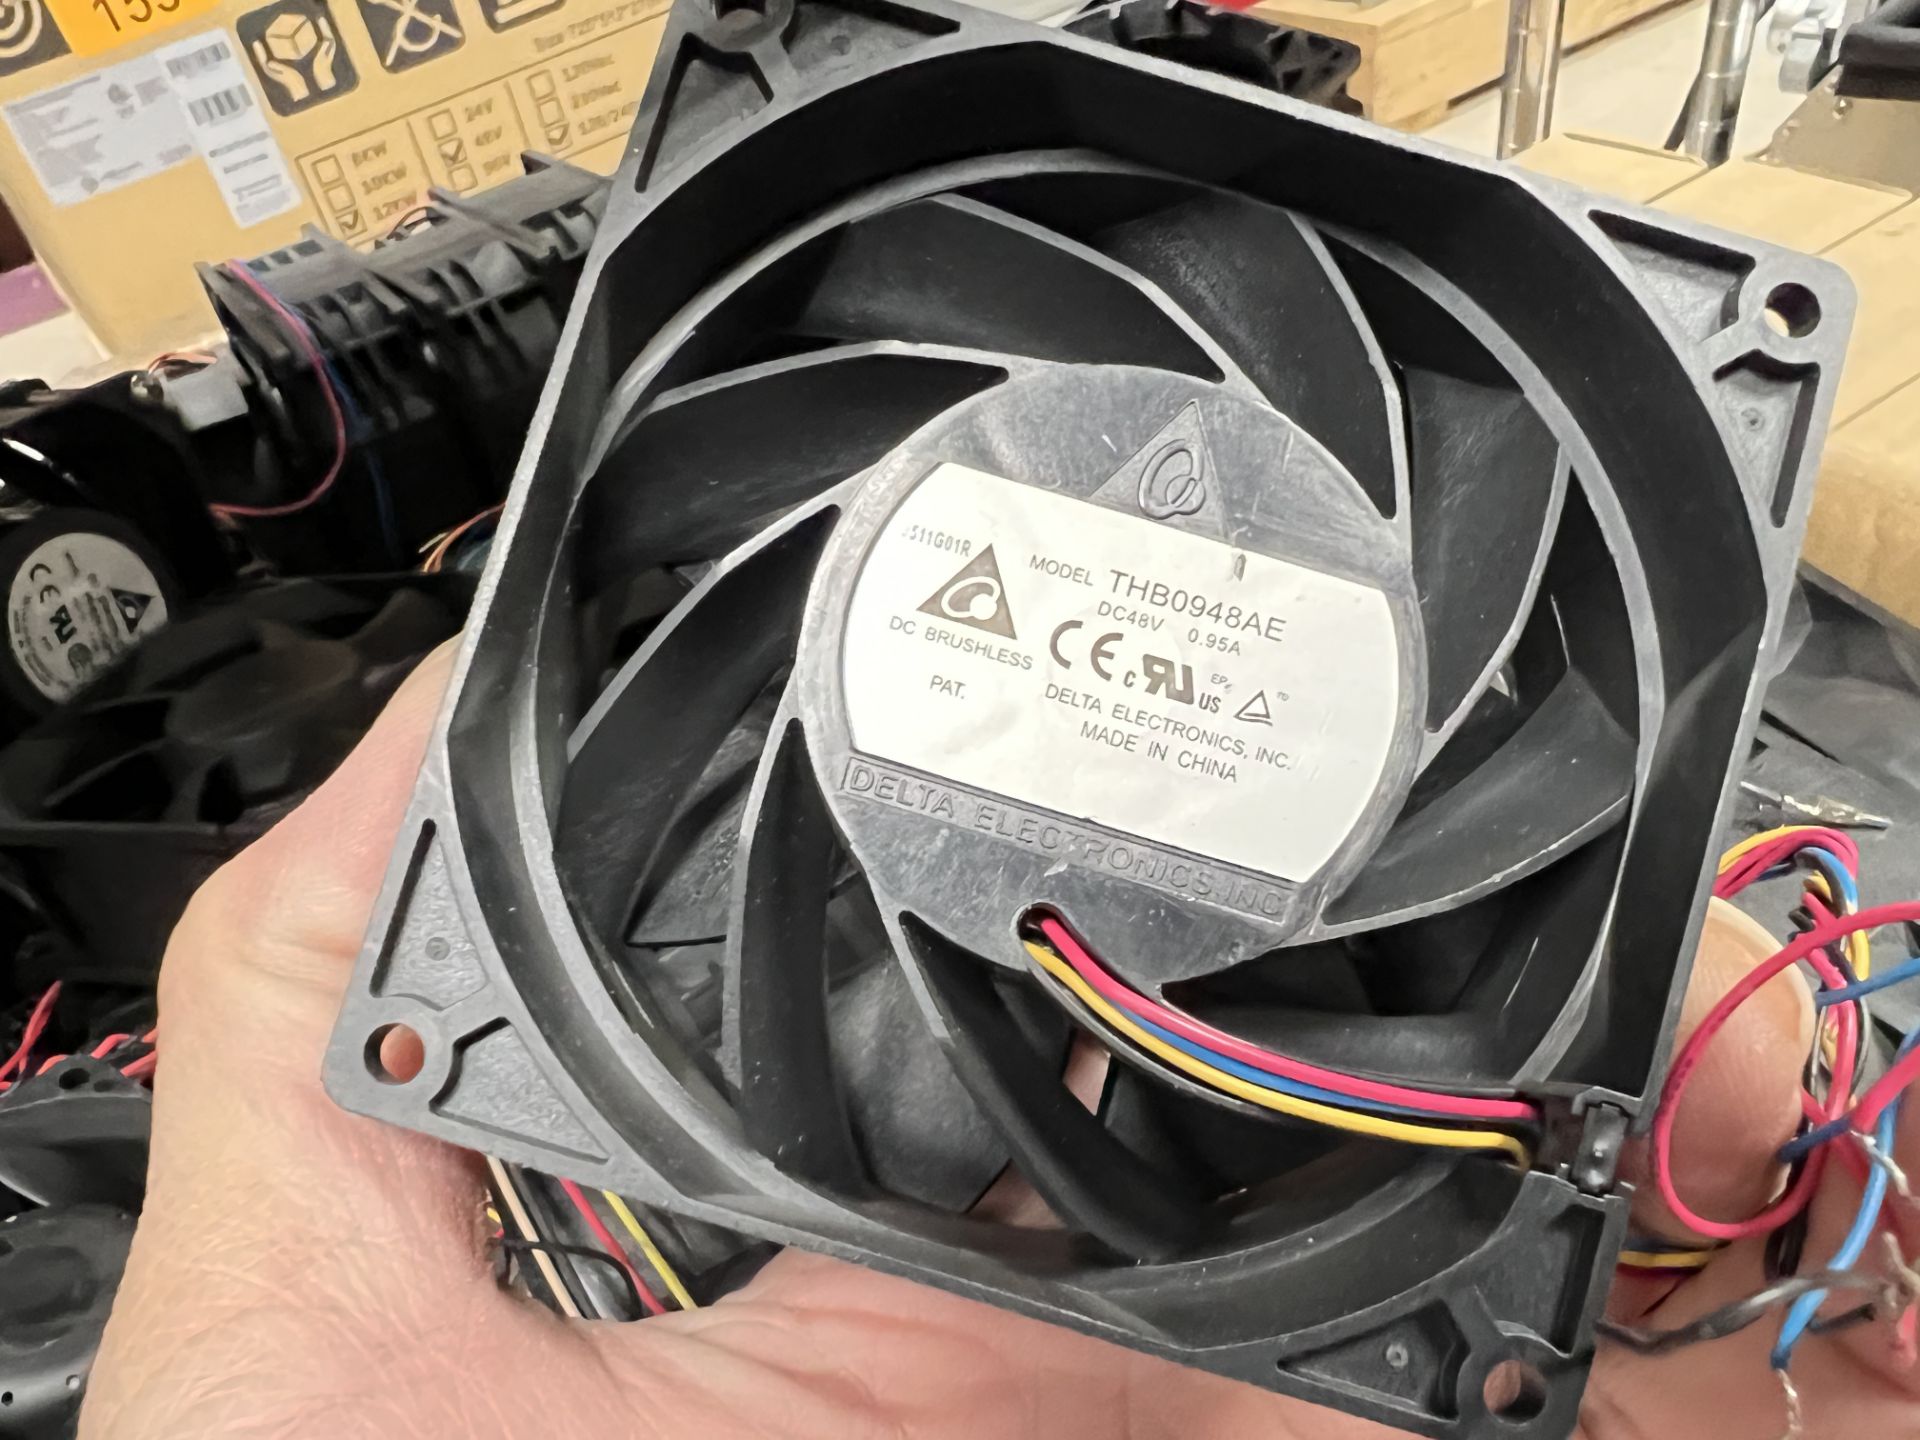 Axial Fans /DC Cooling Fans - Image 14 of 20